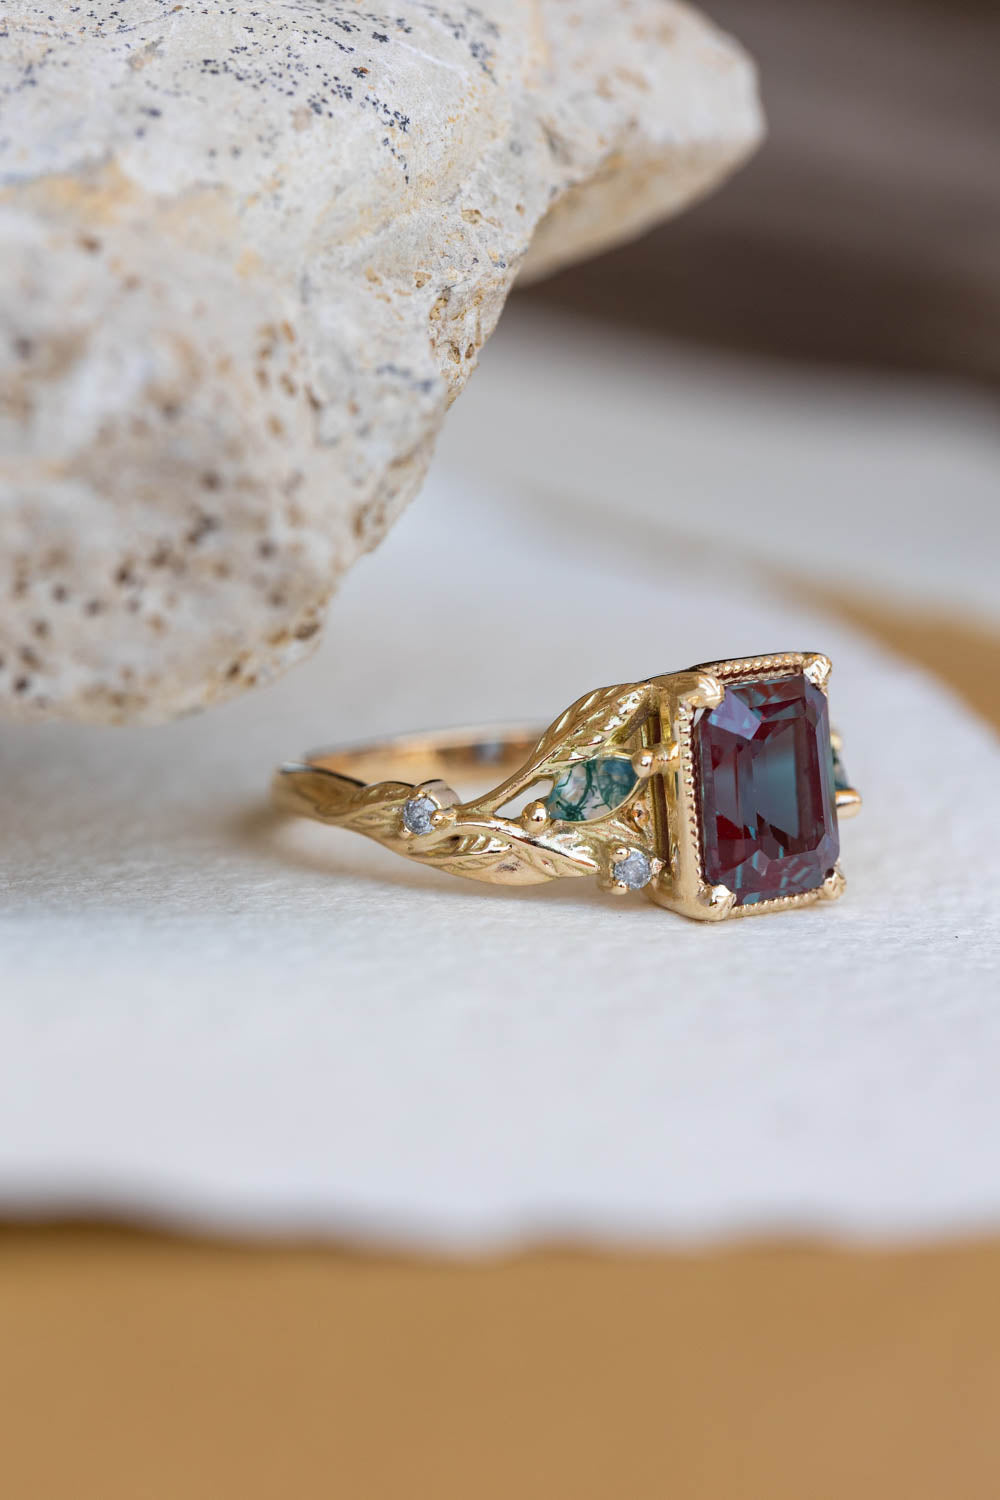 READY TO SHIP: Patricia ring in 14K yellow gold, lab alexandrite emerald cut 8x6 mm, accent moss agates and salt&pepper diamonds, AVAILABLE RING SIZES: 6-8US - Eden Garden Jewelry™